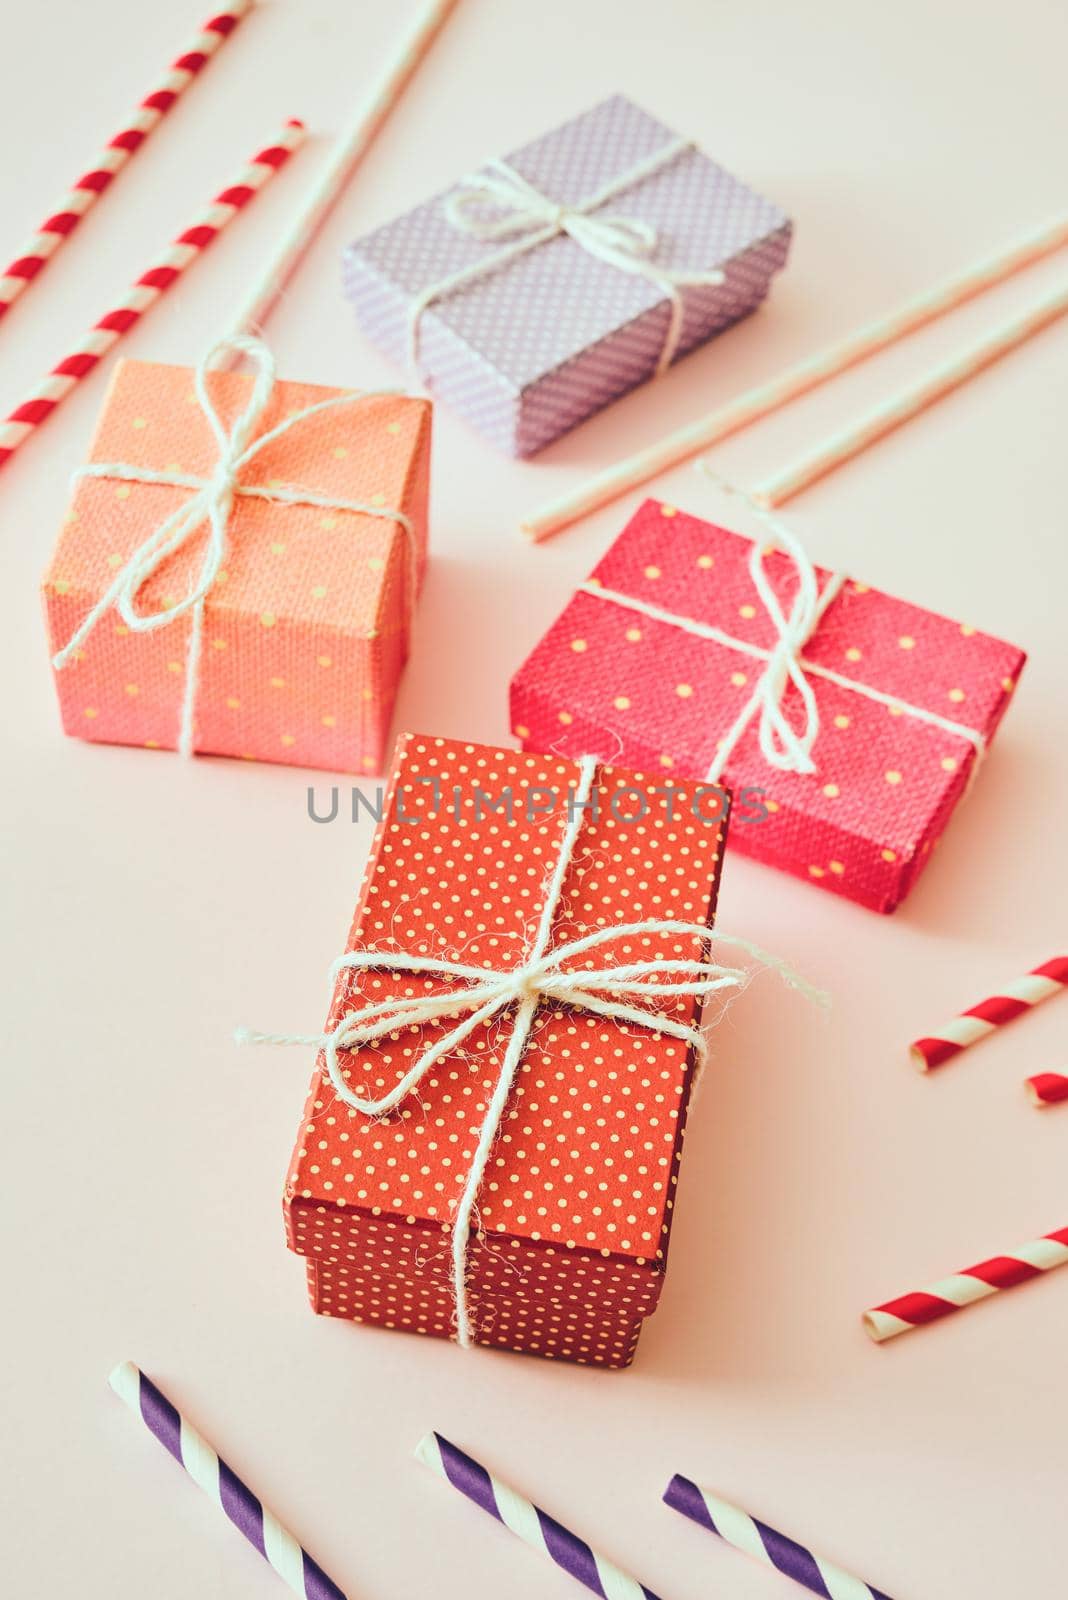 Different holiday colorful gift boxes wrapped in colorful paper and bows on beige background. by makidotvn